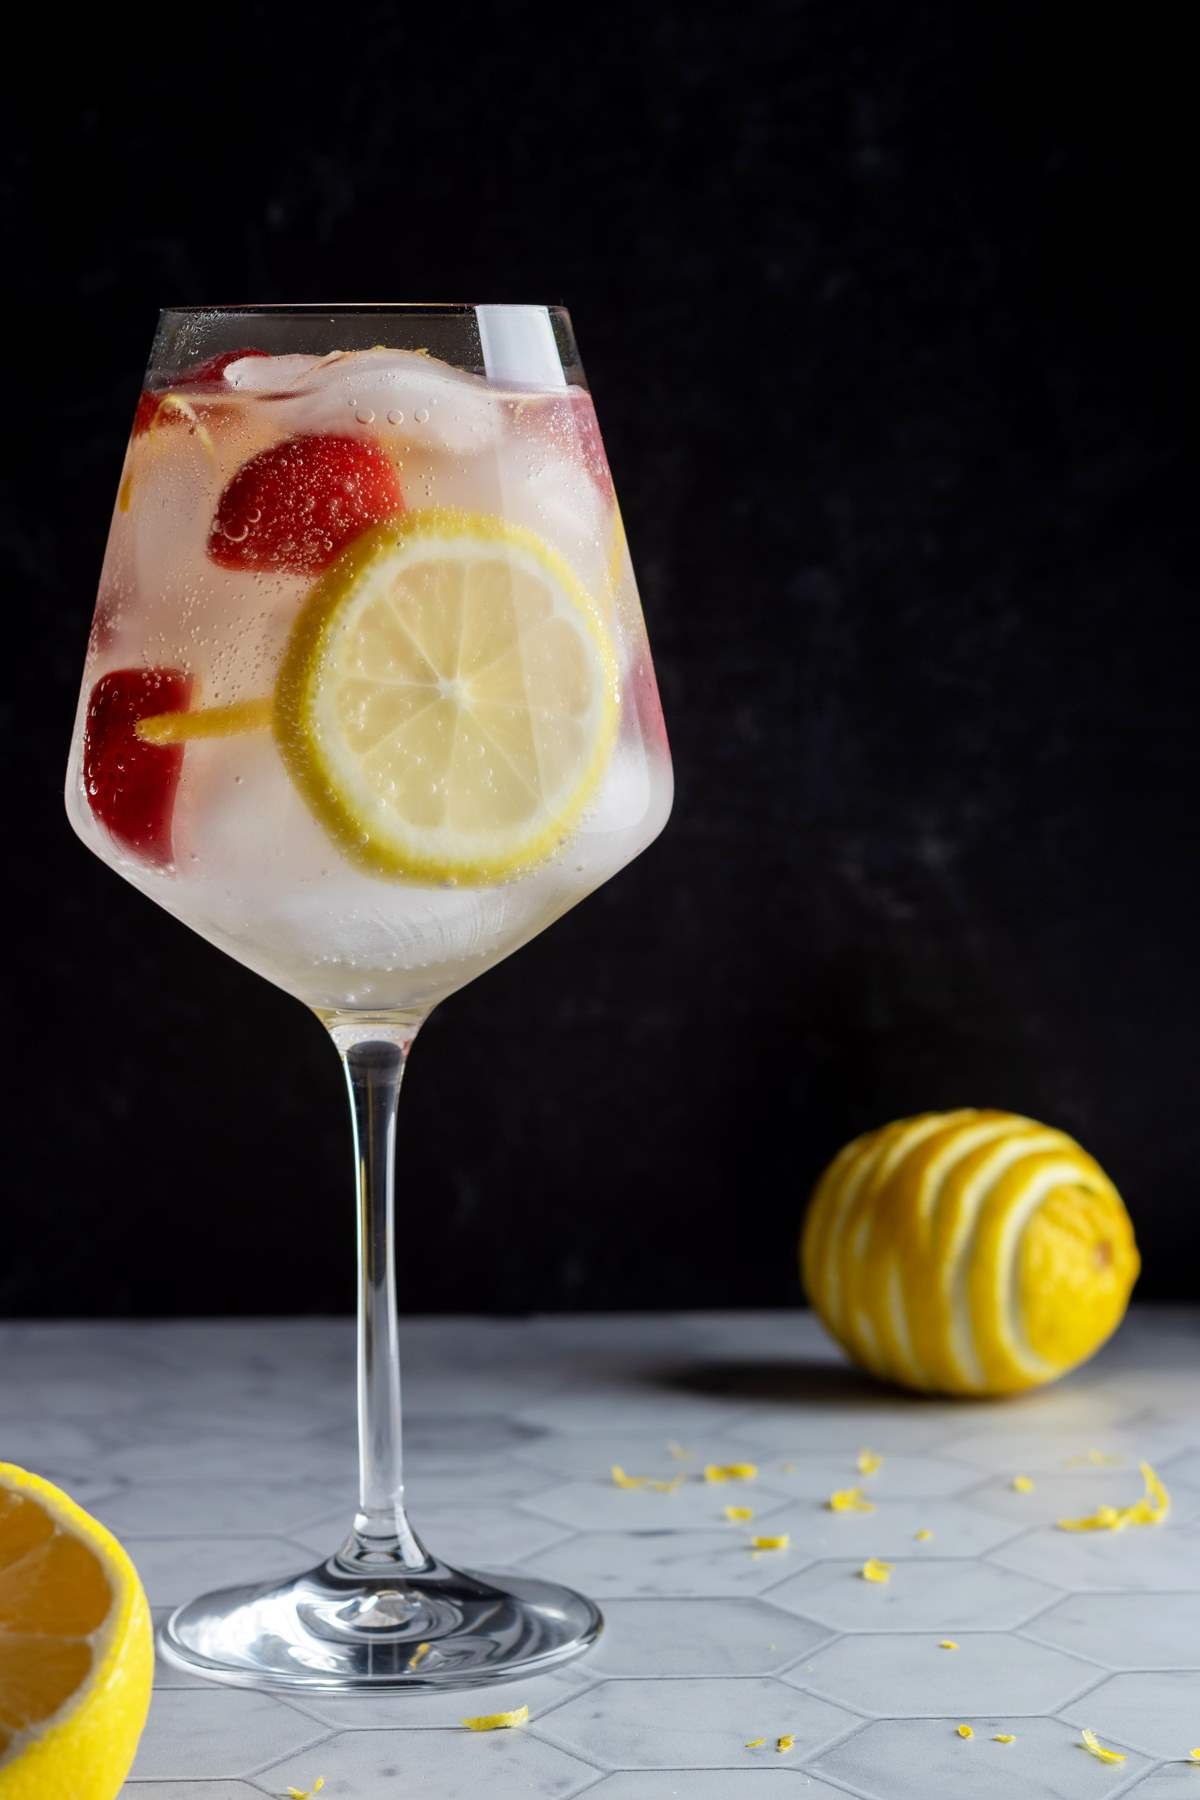 Strawberry lemon gin and tonic in a glass.